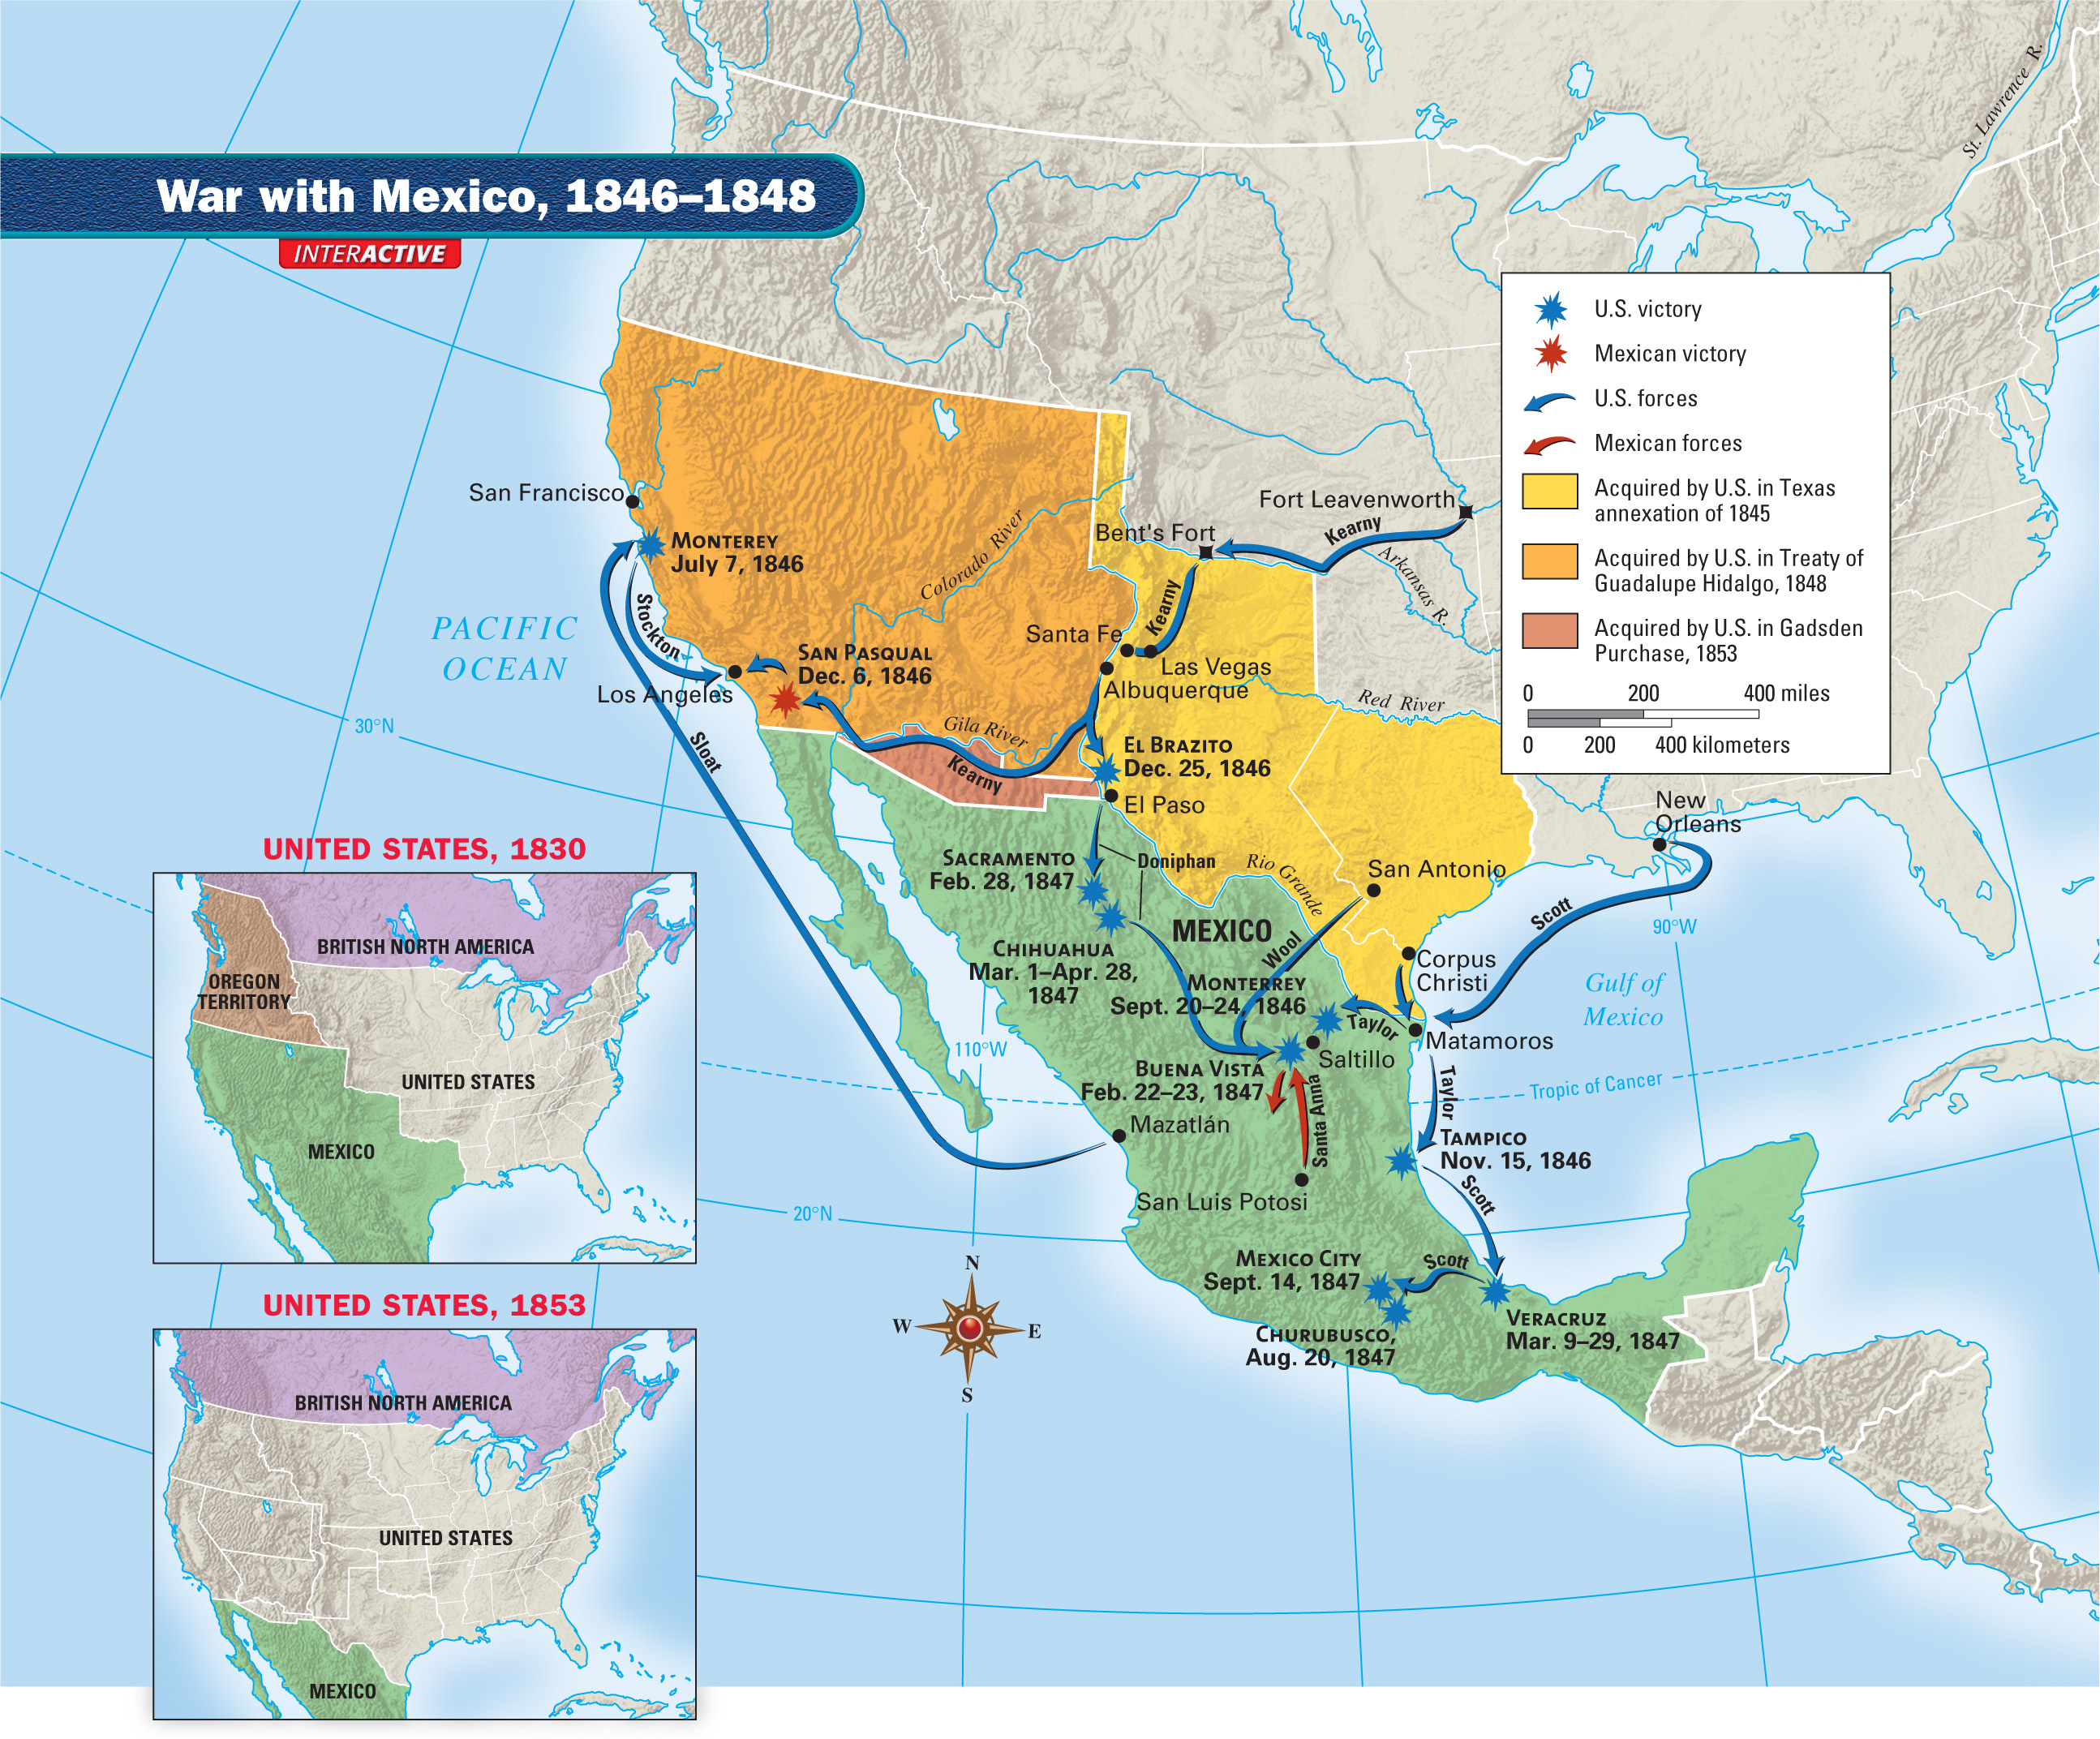 A map titled War with Mexico, 1846-1848.